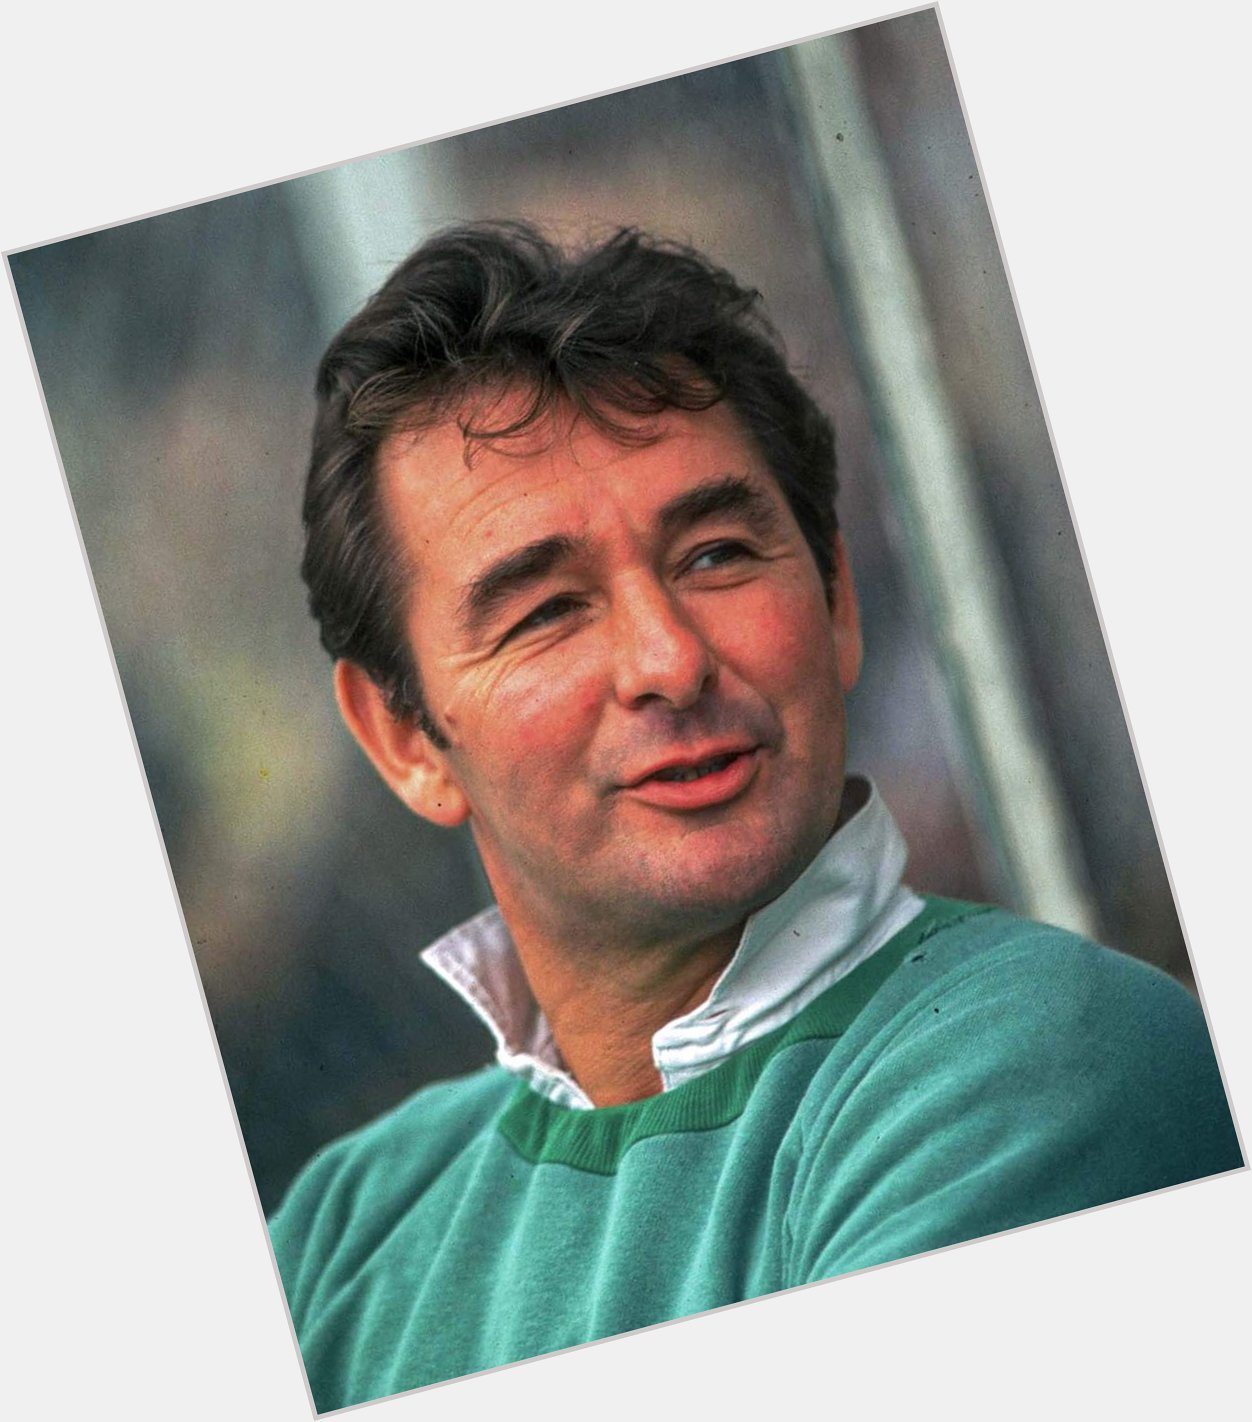 Happy birthday to the absolute legend that was Brian Clough. GBNF 